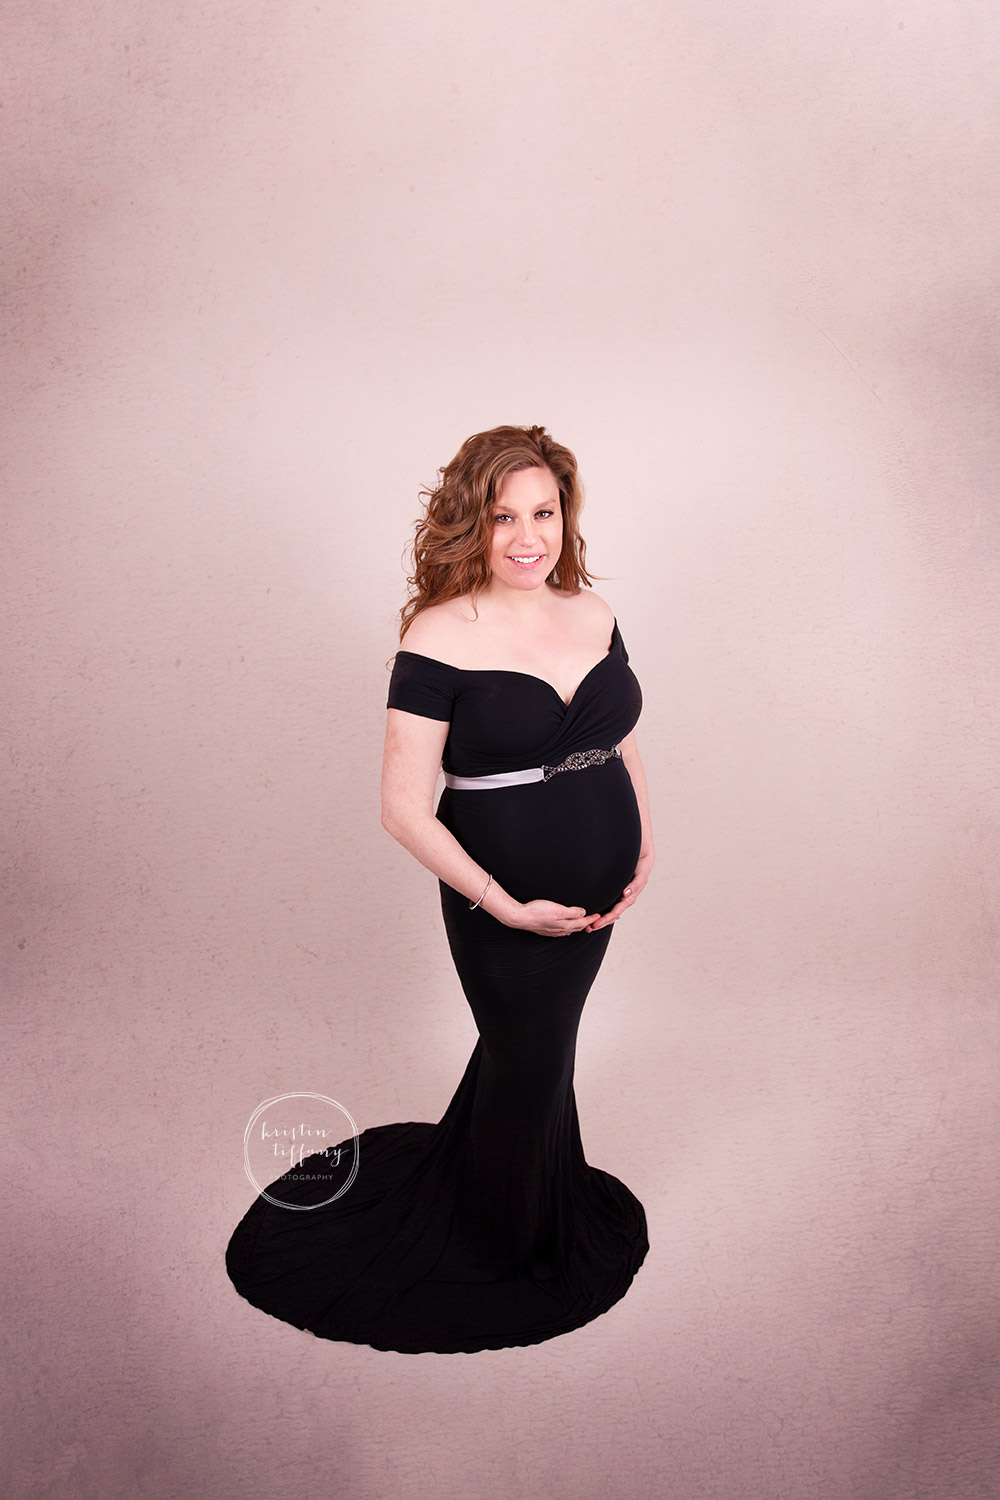 a maternity photo of a woman in a pretty dress